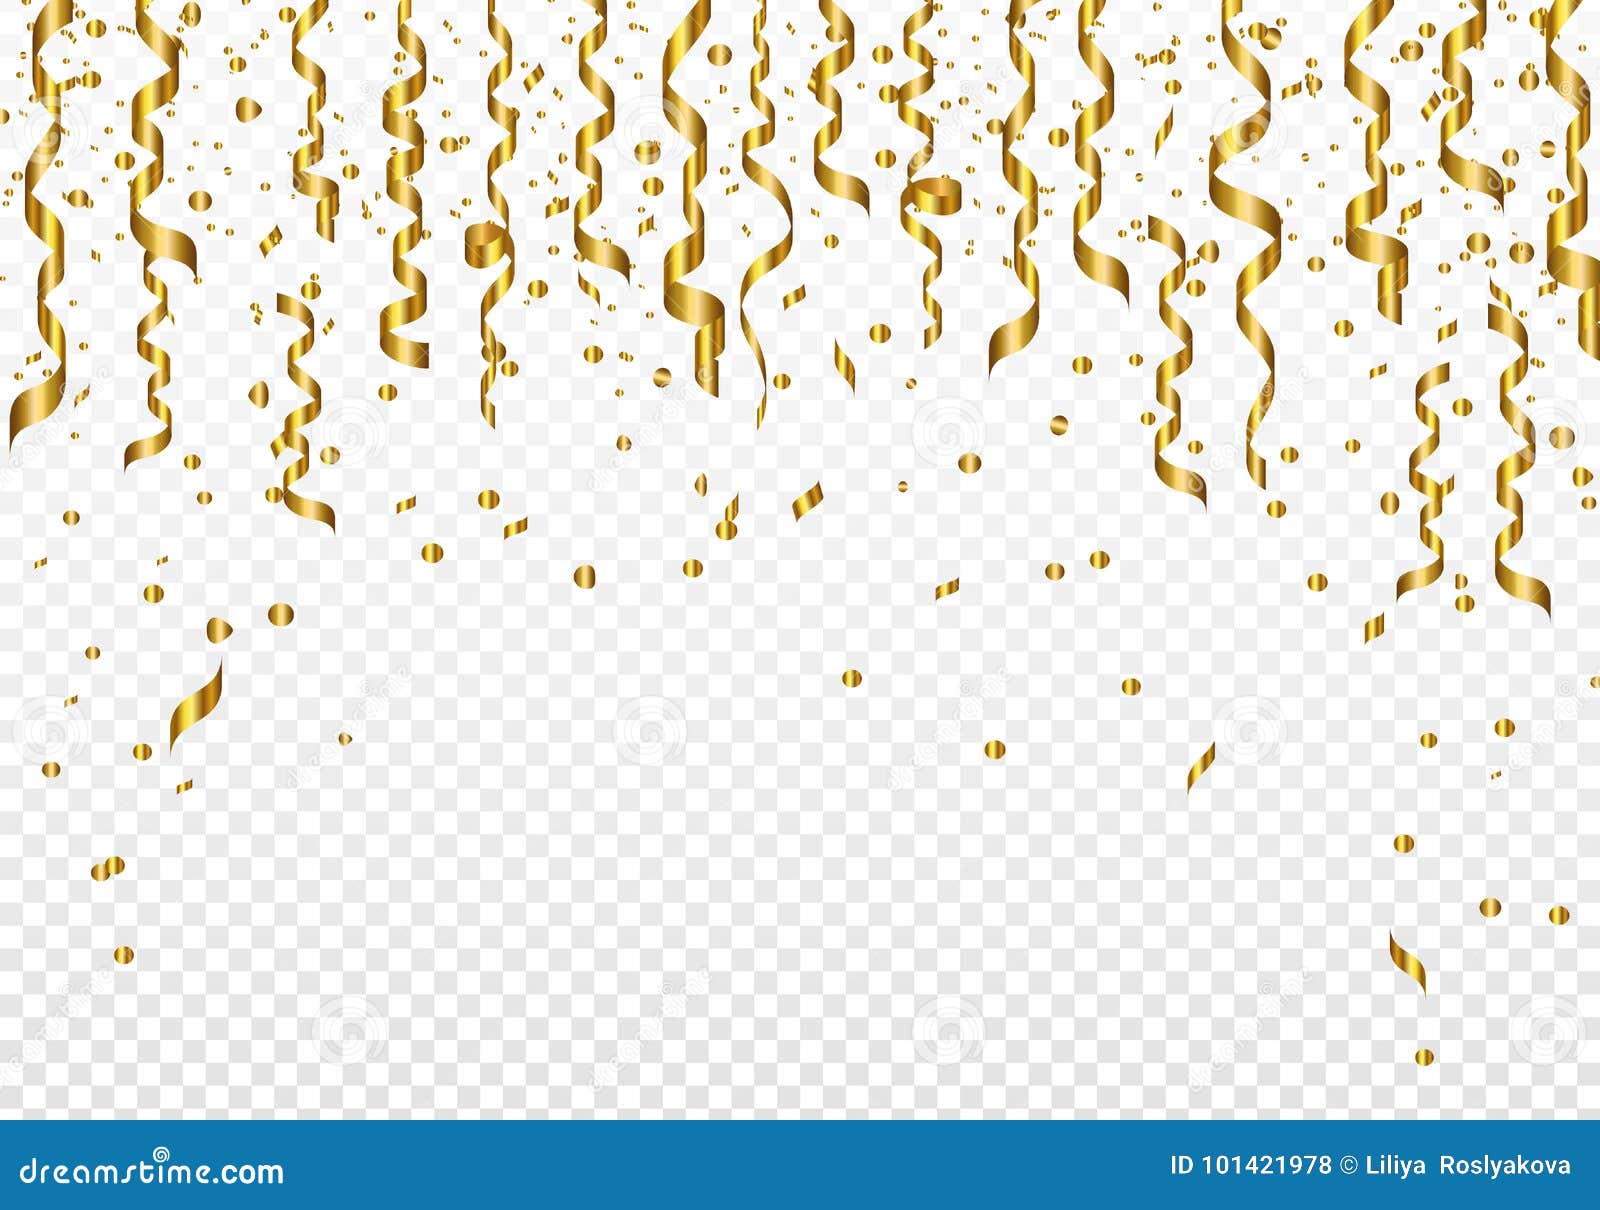 Celebration Background Template with Confetti and Ribbons on Transparent  Background. Vector Illustration. Stock Vector - Illustration of happy,  ornament: 101421978